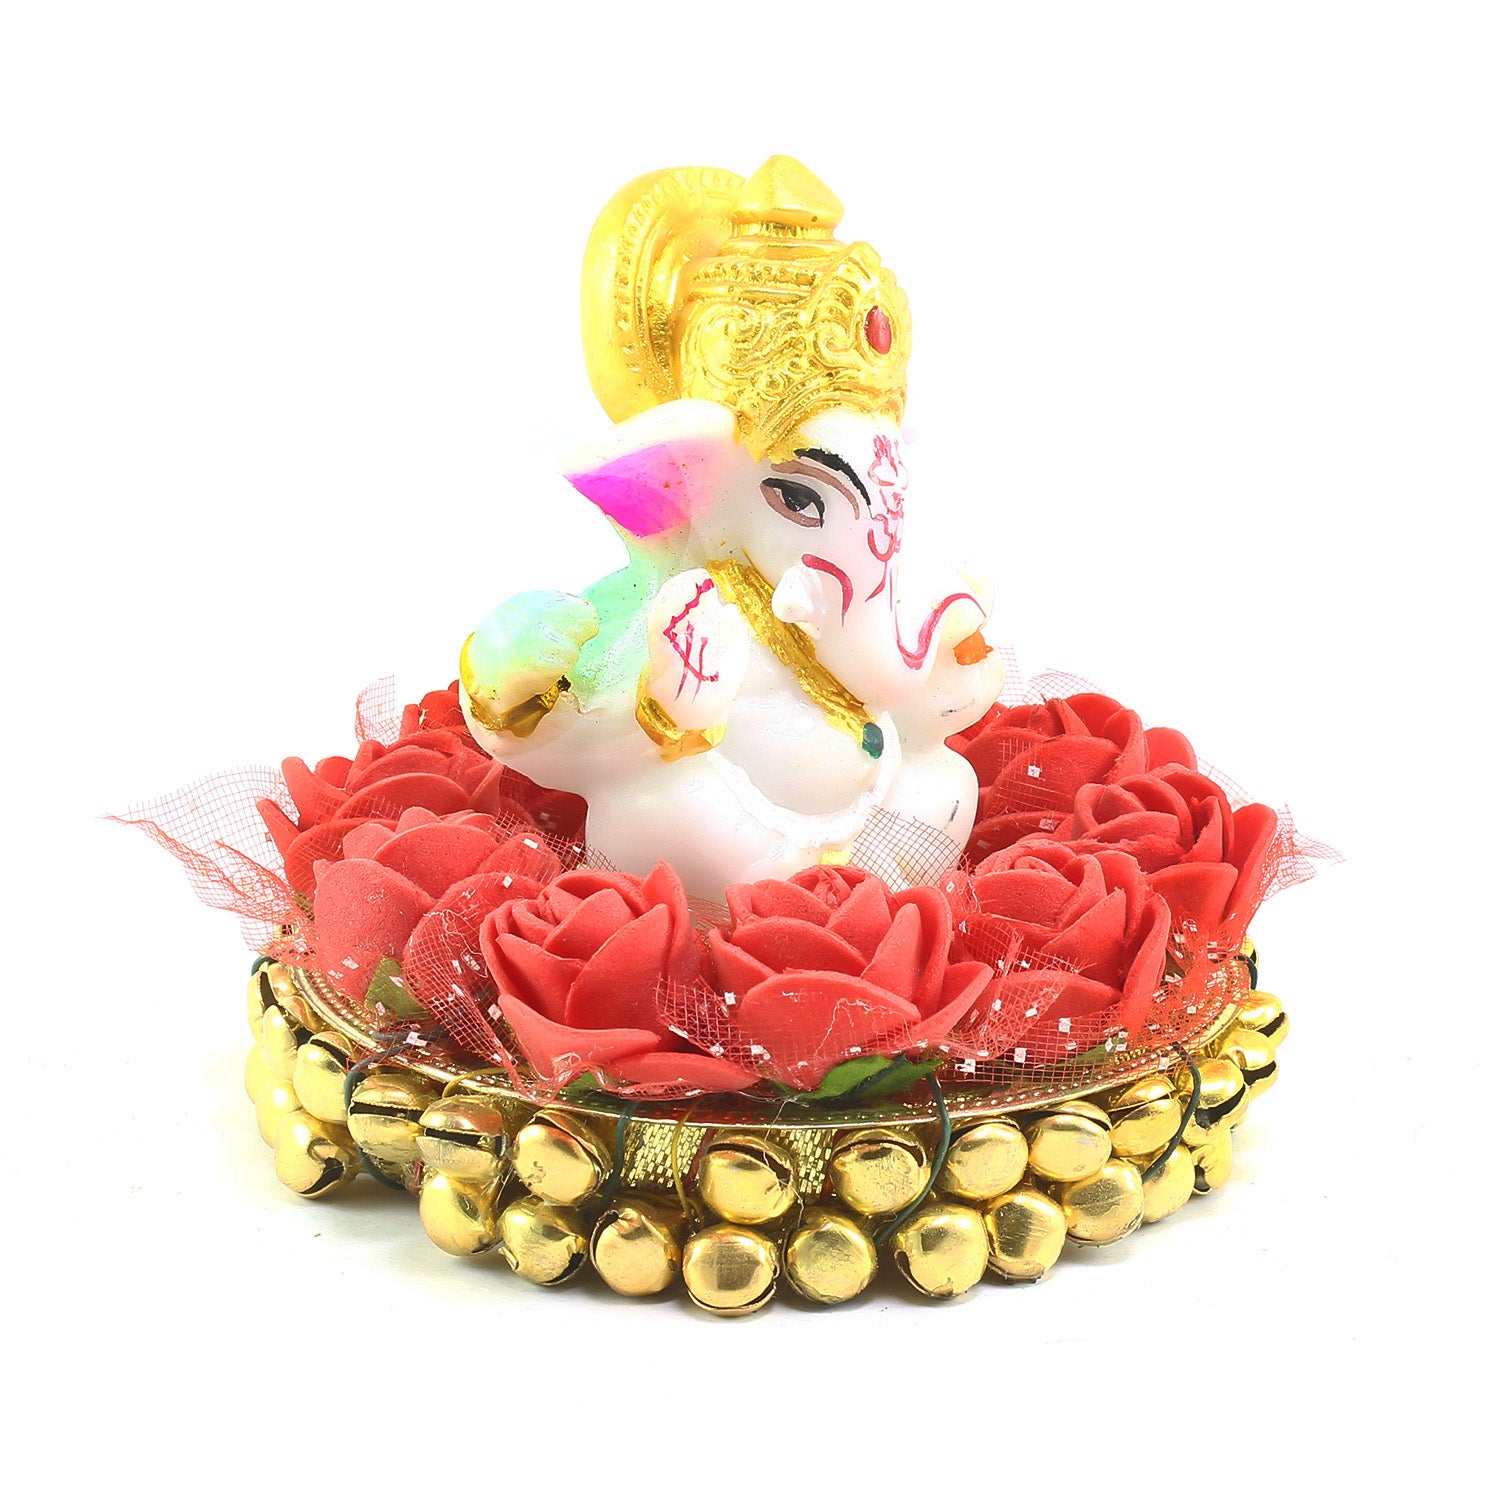 Polyresin Lord Ganesha Idol on Decorative Plate for Car Dashboard and Home 3